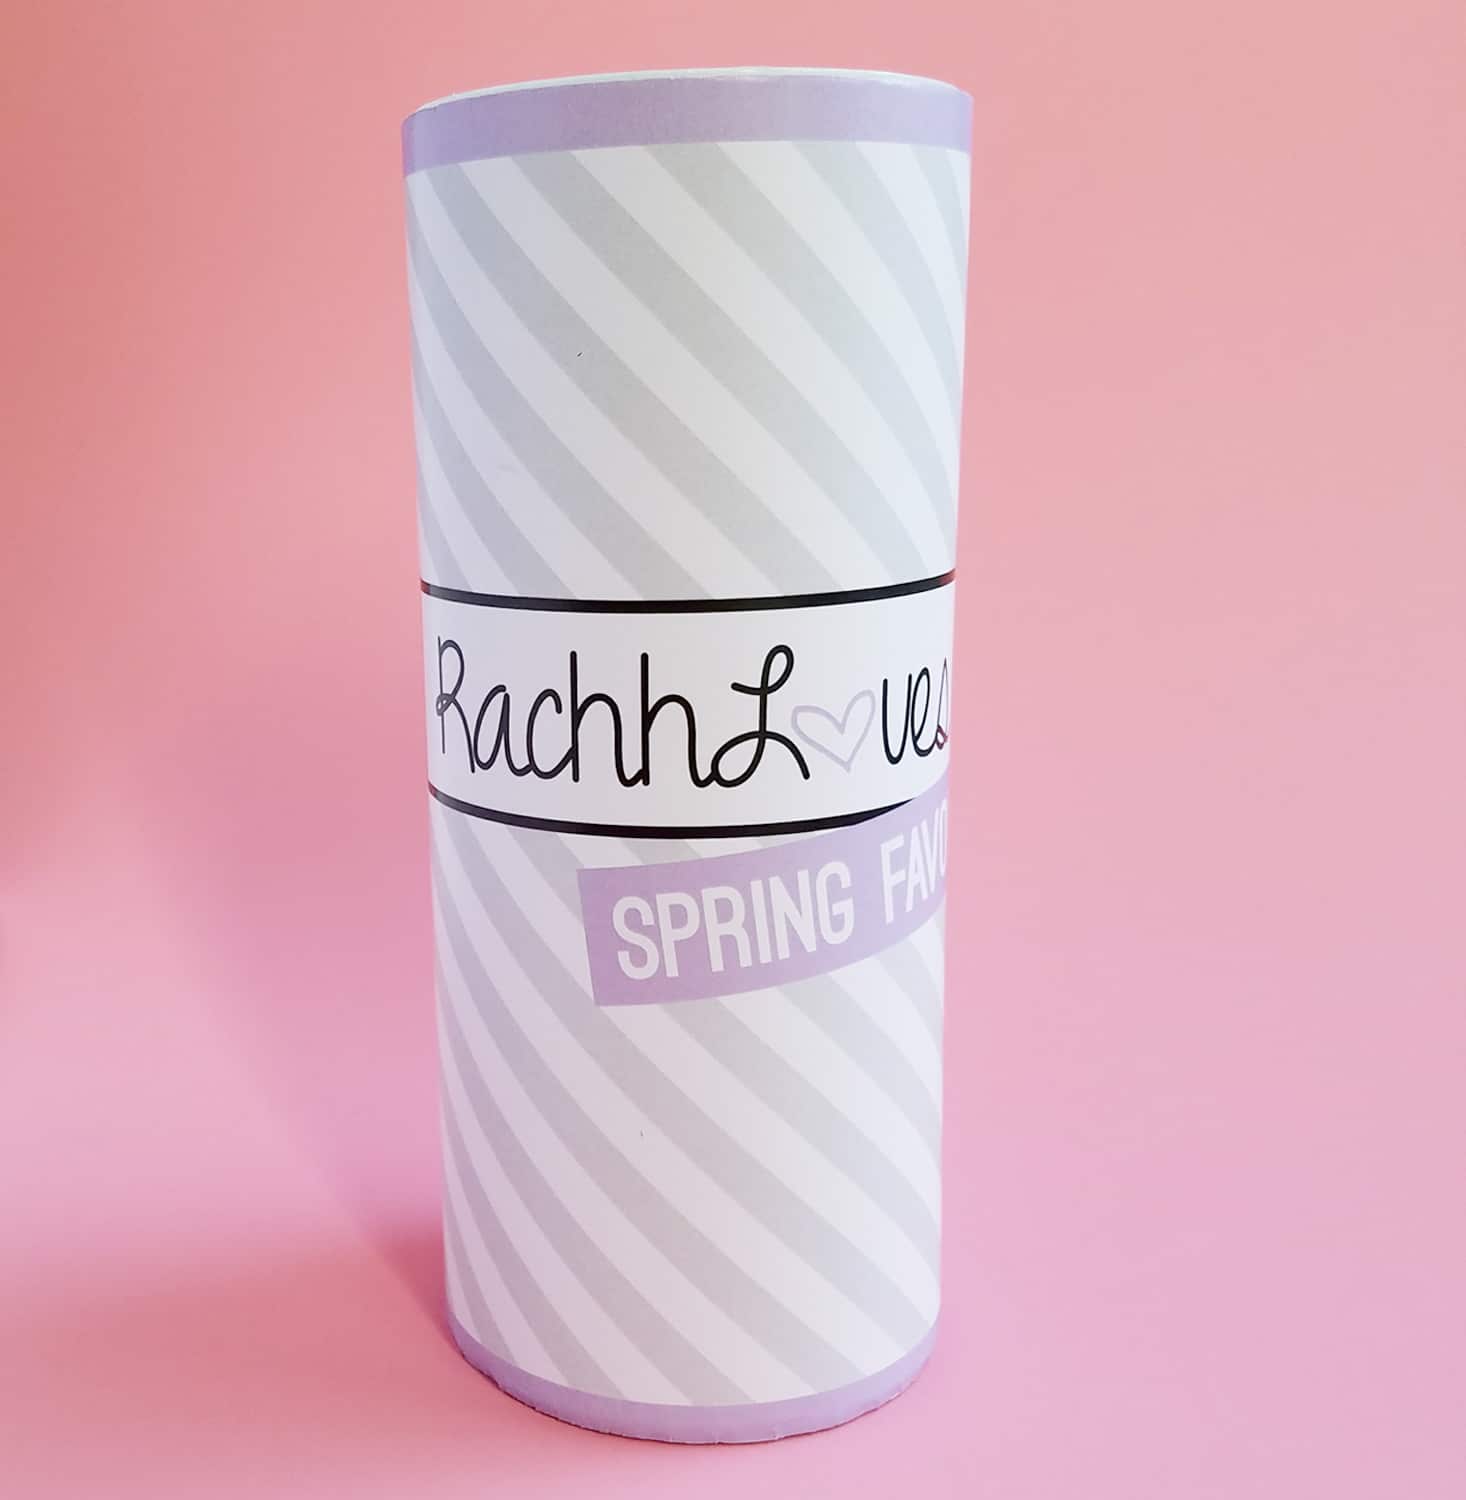 RachhLoves Spring Favourites Box Review – May 2017